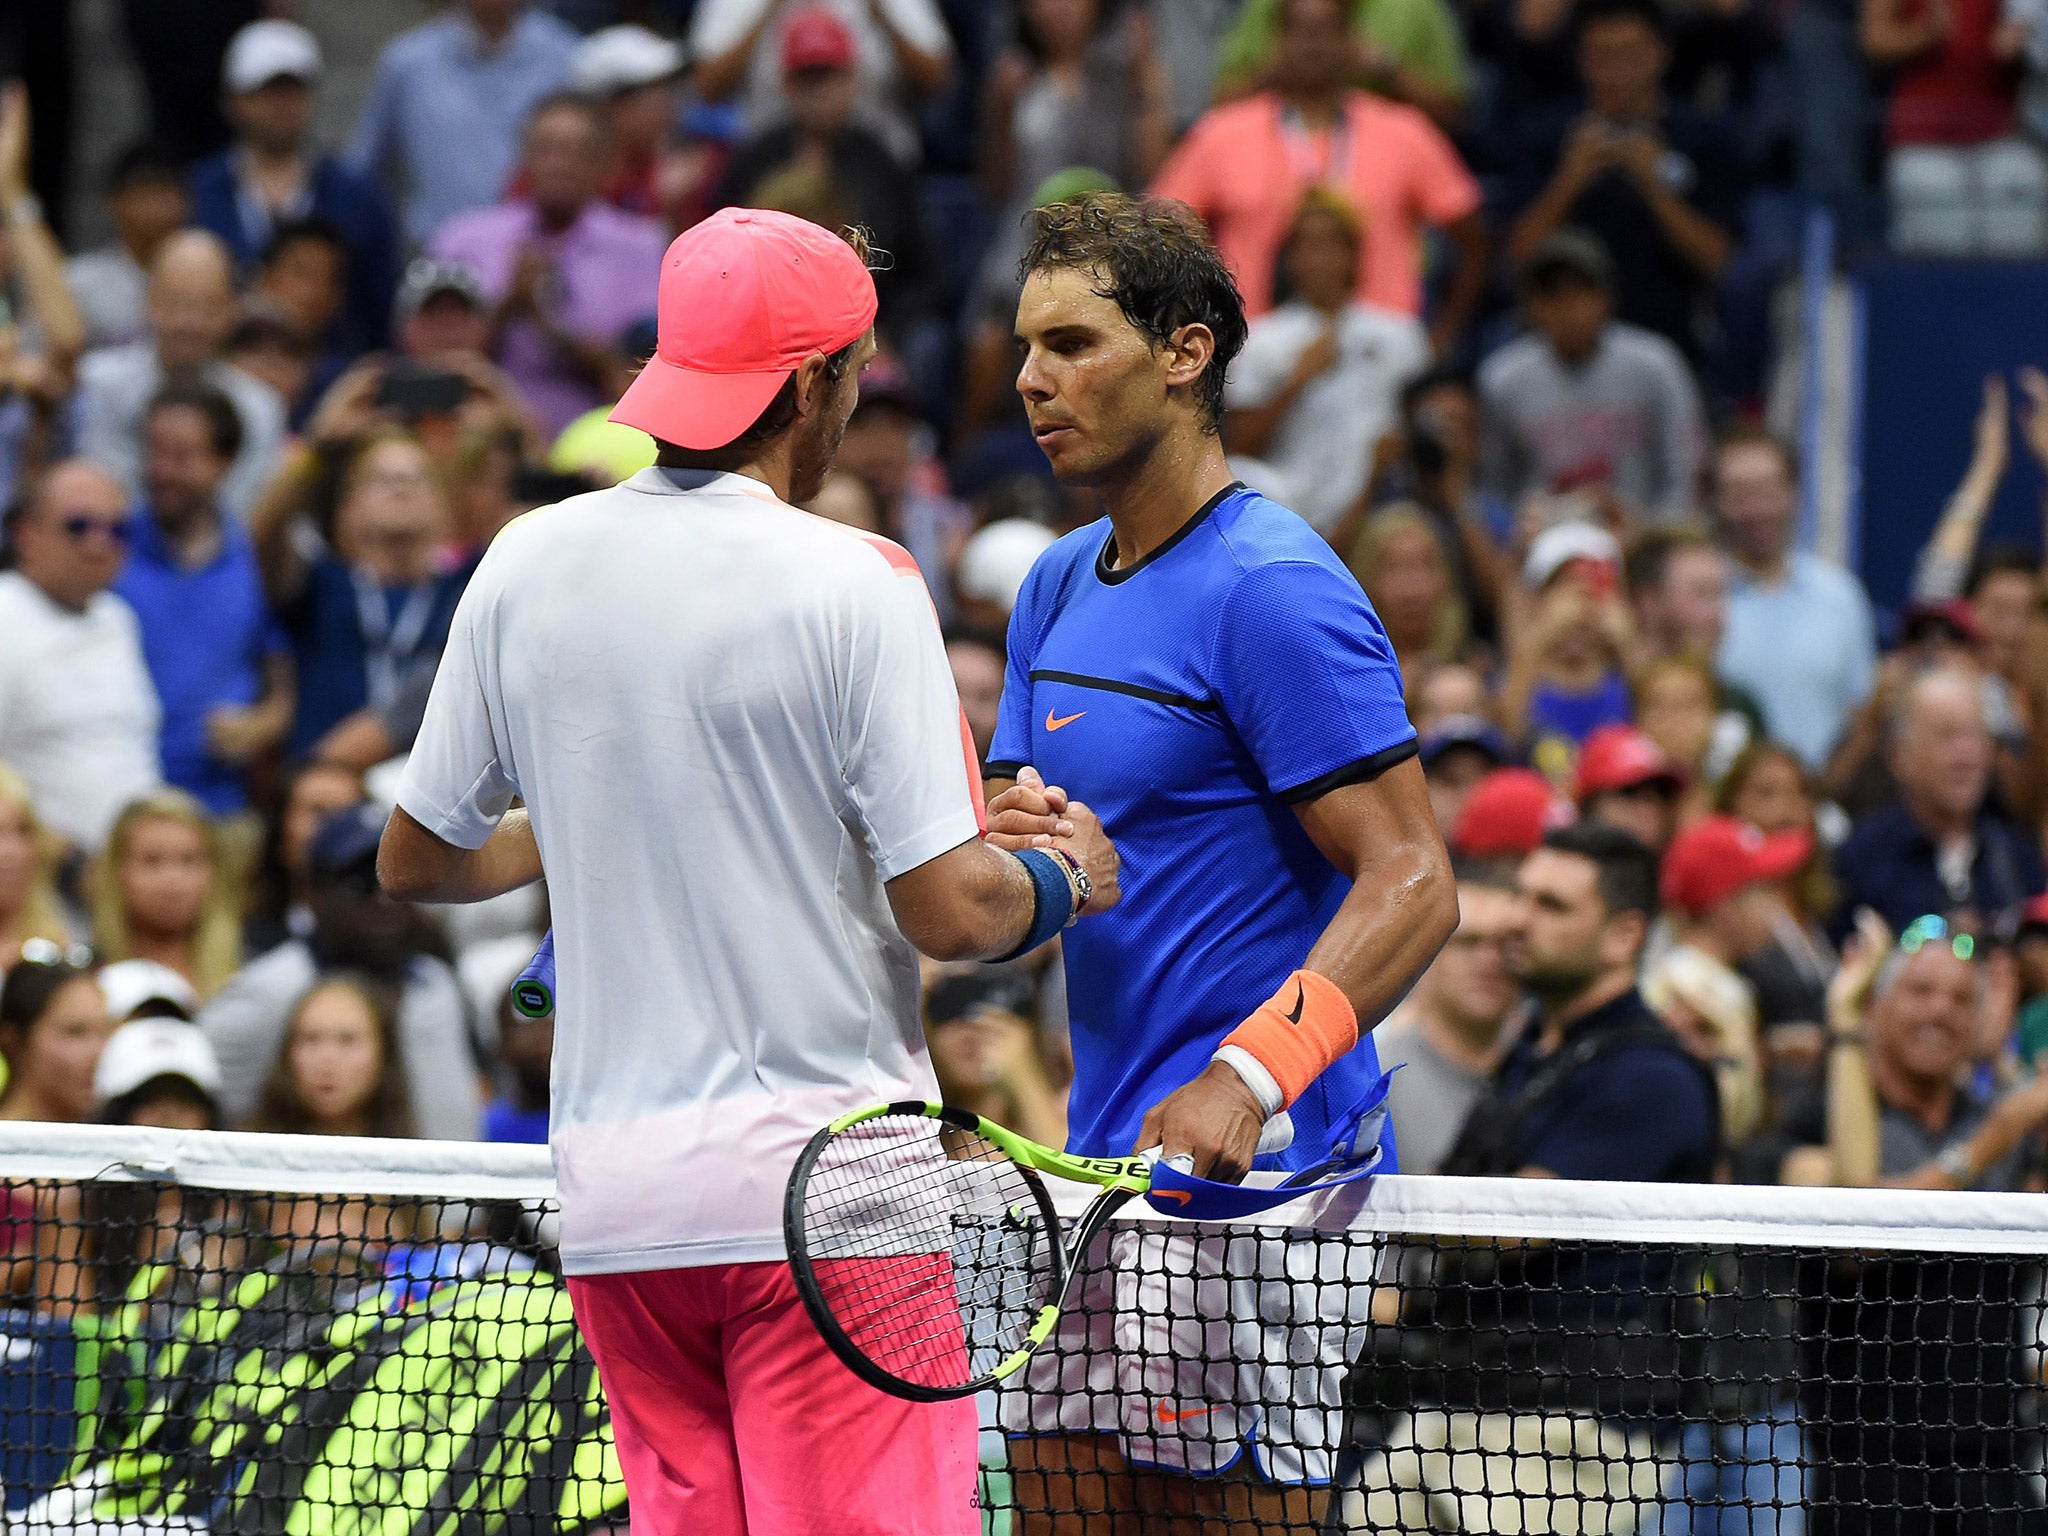 Nadal congratulates Pouille on his victory